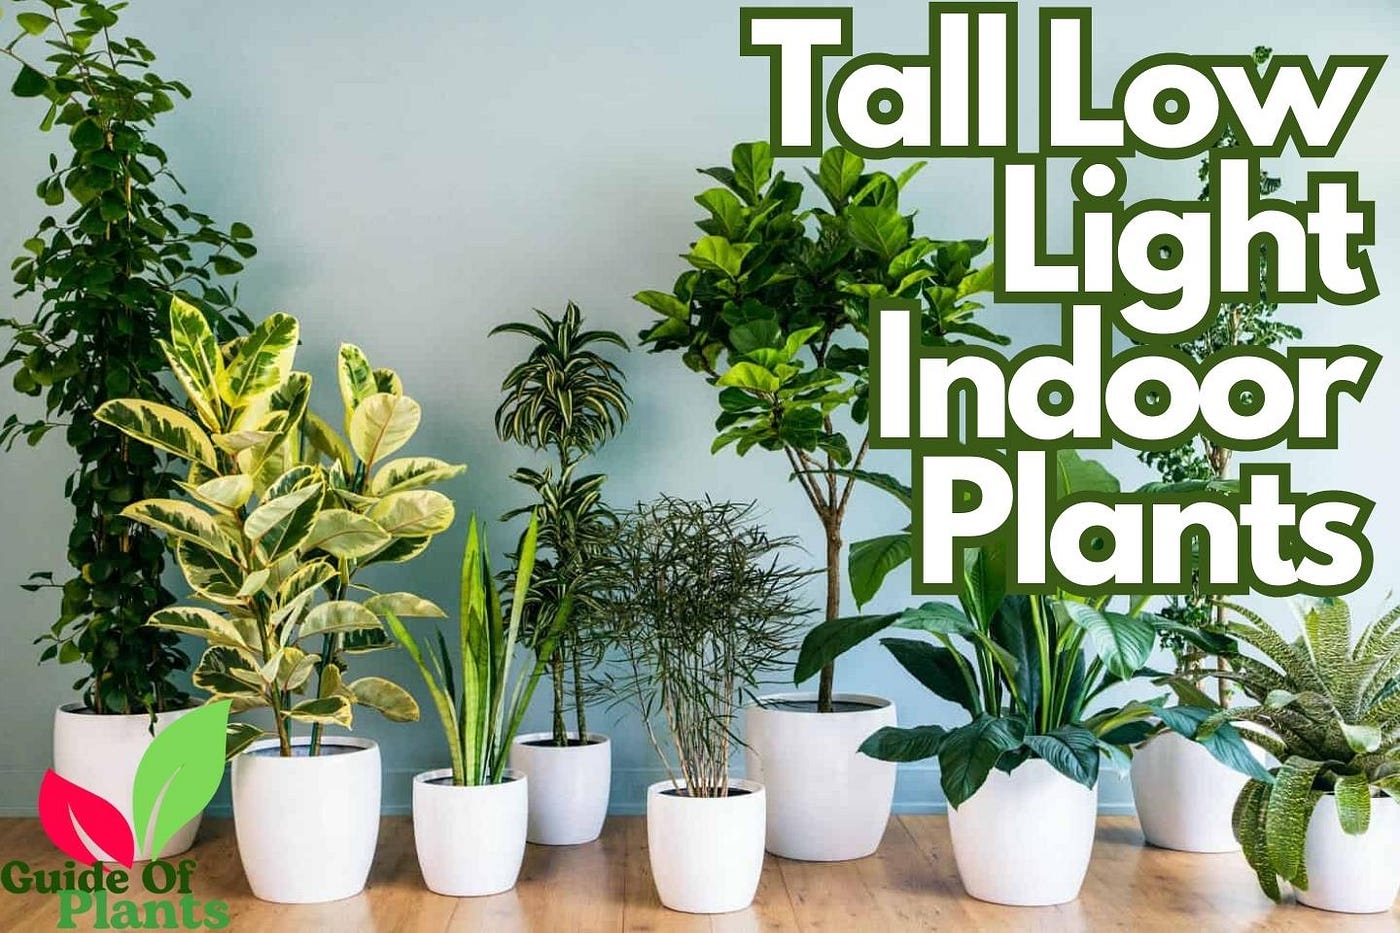 5 Tall Low Light Indoor Plants For Your Indoor Space | by KMR Blogs | Medium